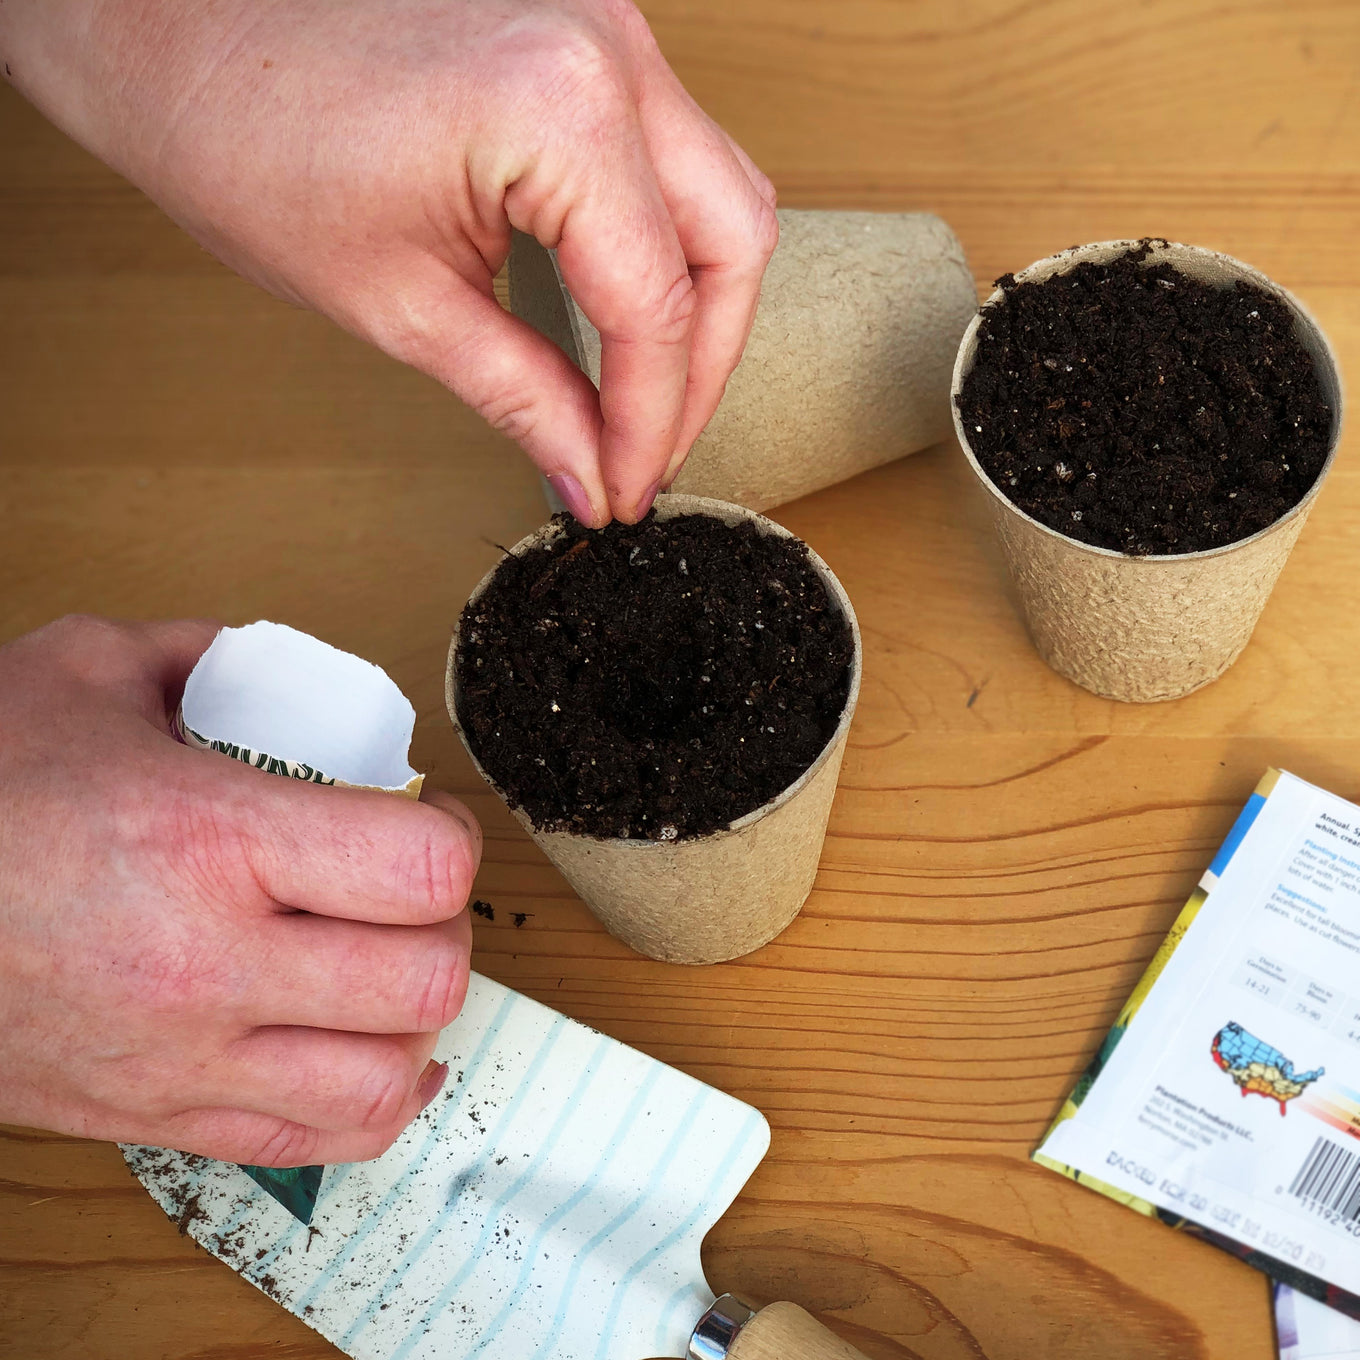 Start your Garden Sweet Burpless F1 Organic Cucumber seeds in biodegradable peat and paper pots.